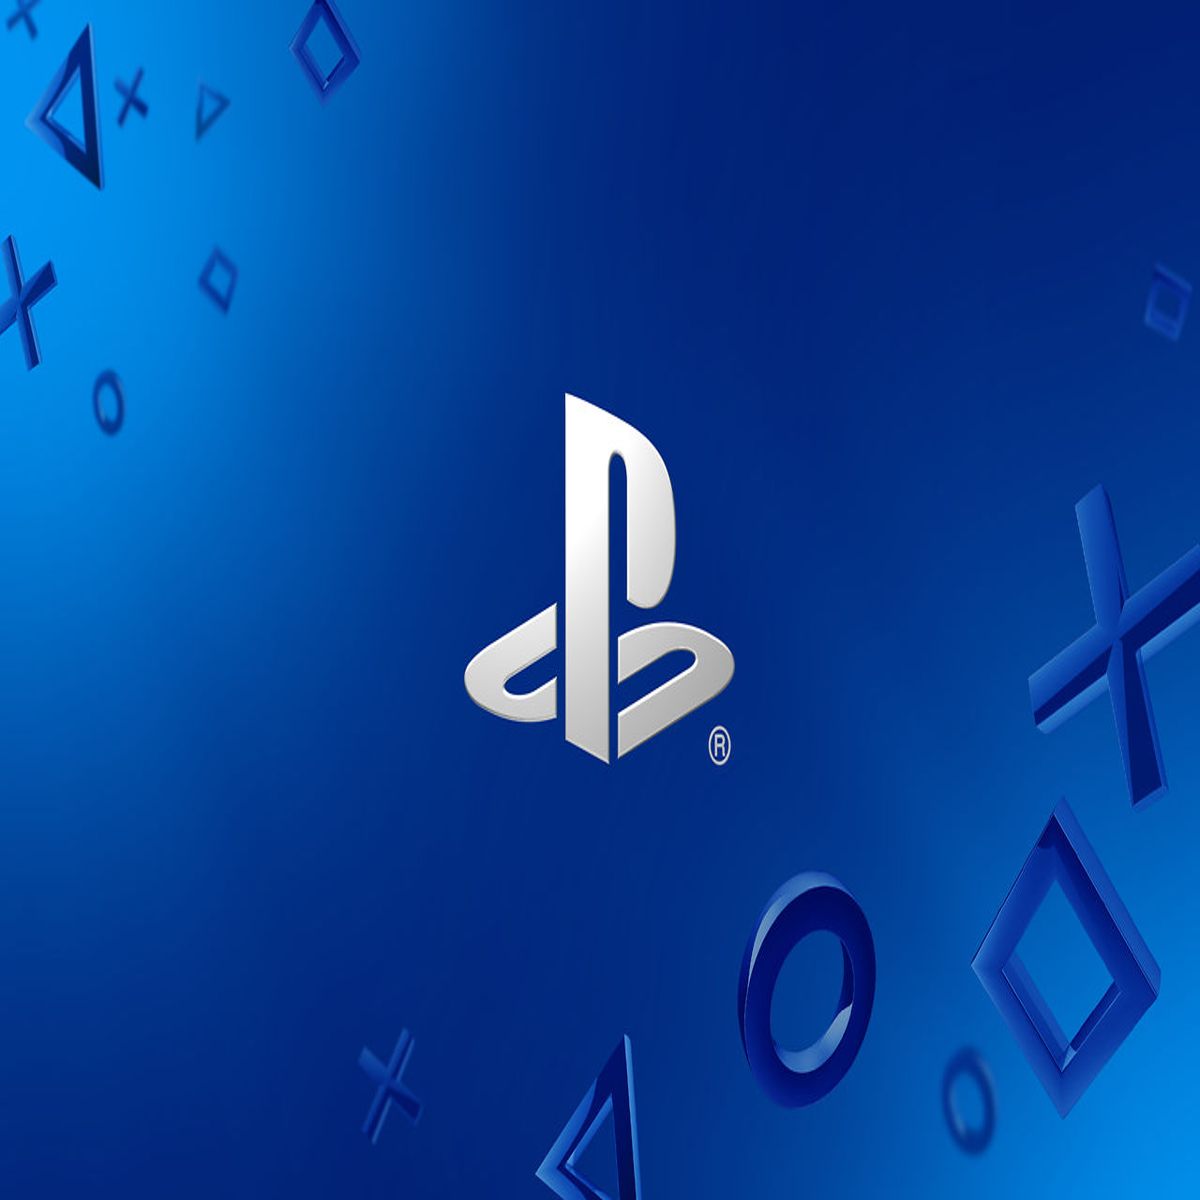 PSN login: How to sign in to PlayStation Network and how to change